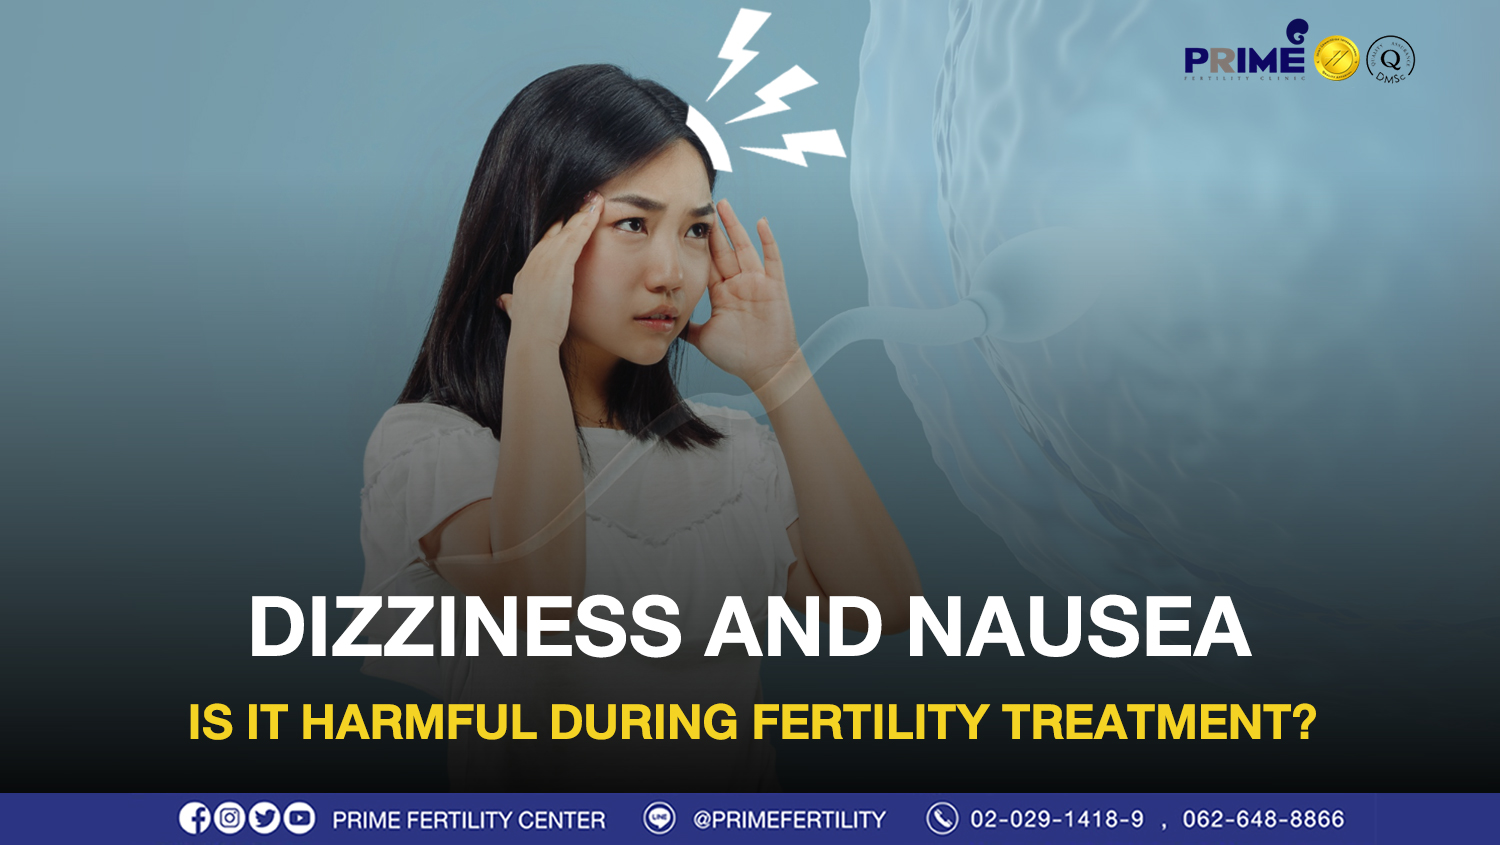 Is dizziness and nausea during fertility treatment harmful?